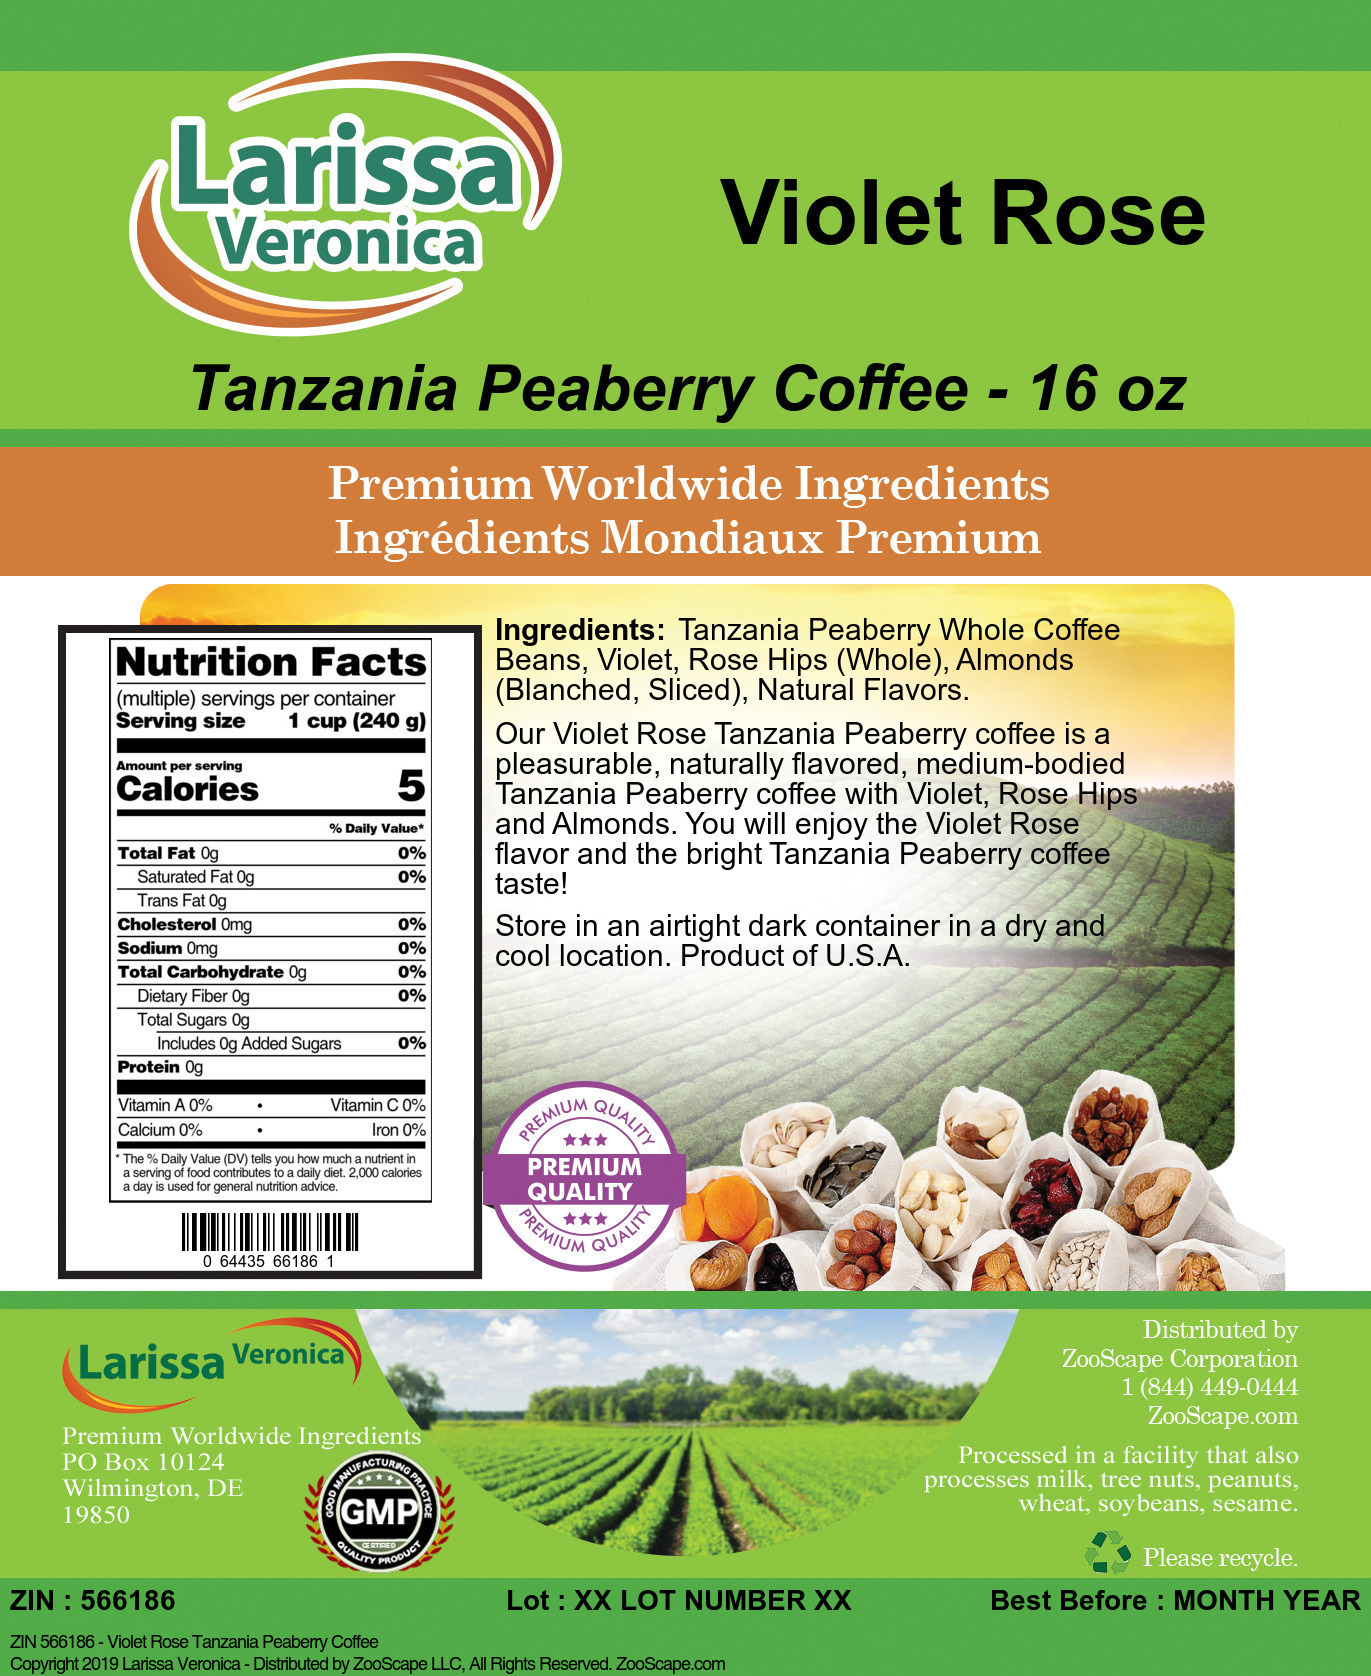 Violet Rose Tanzania Peaberry Coffee - Label